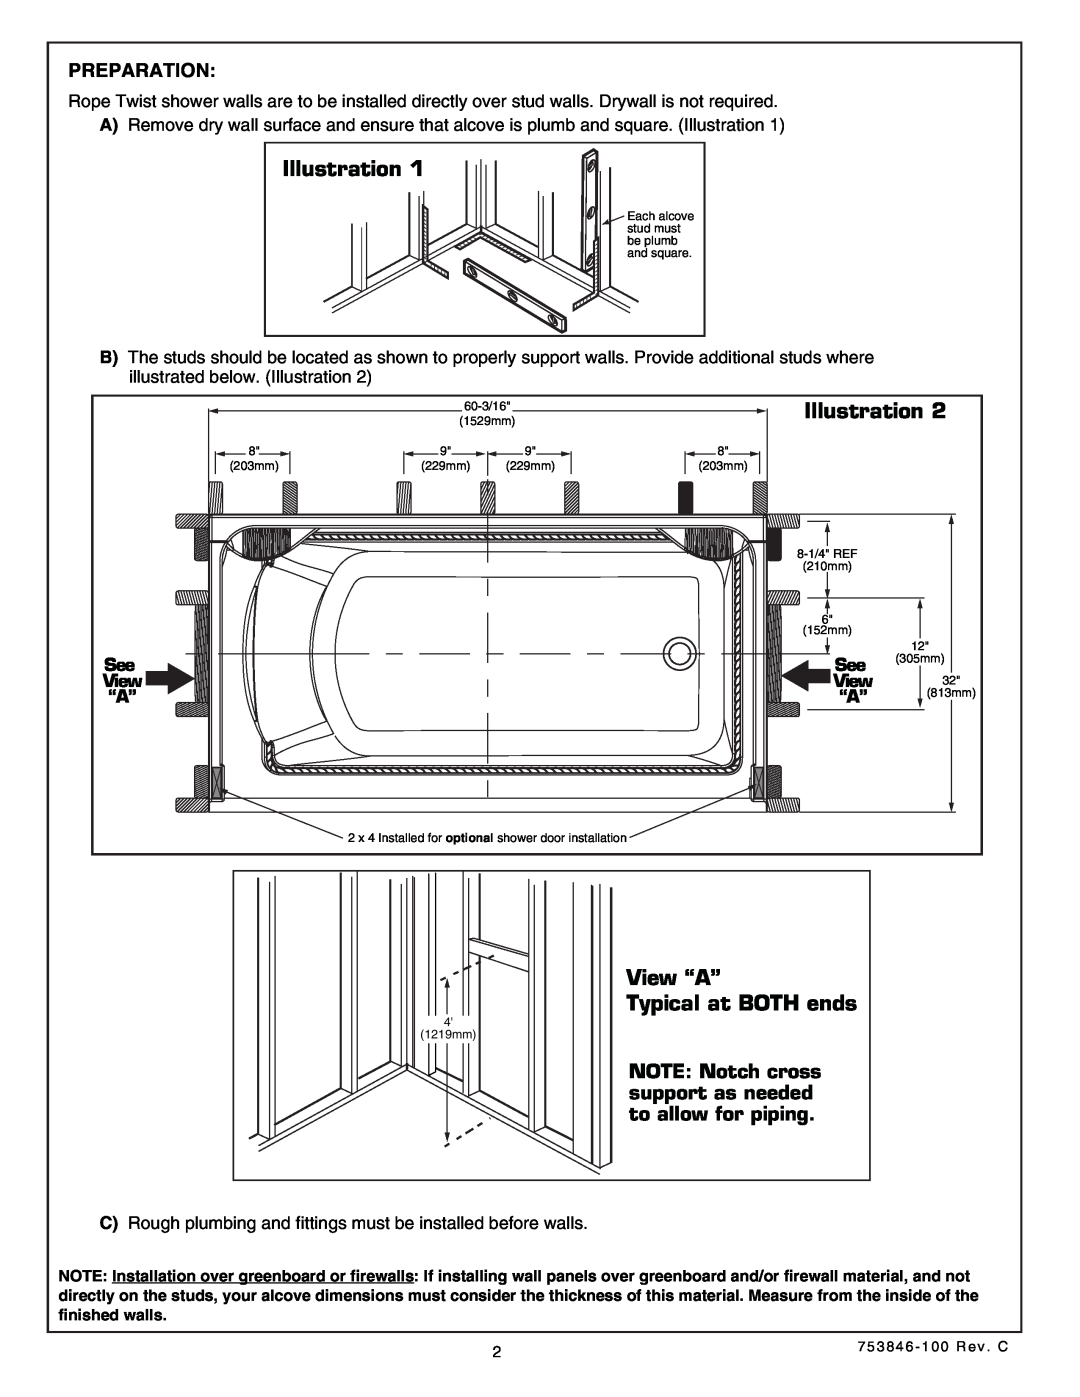 American Standard 5030.LBW installation instructions Illustration, View “A” Typical at BOTH ends, Preparation, See View “A” 